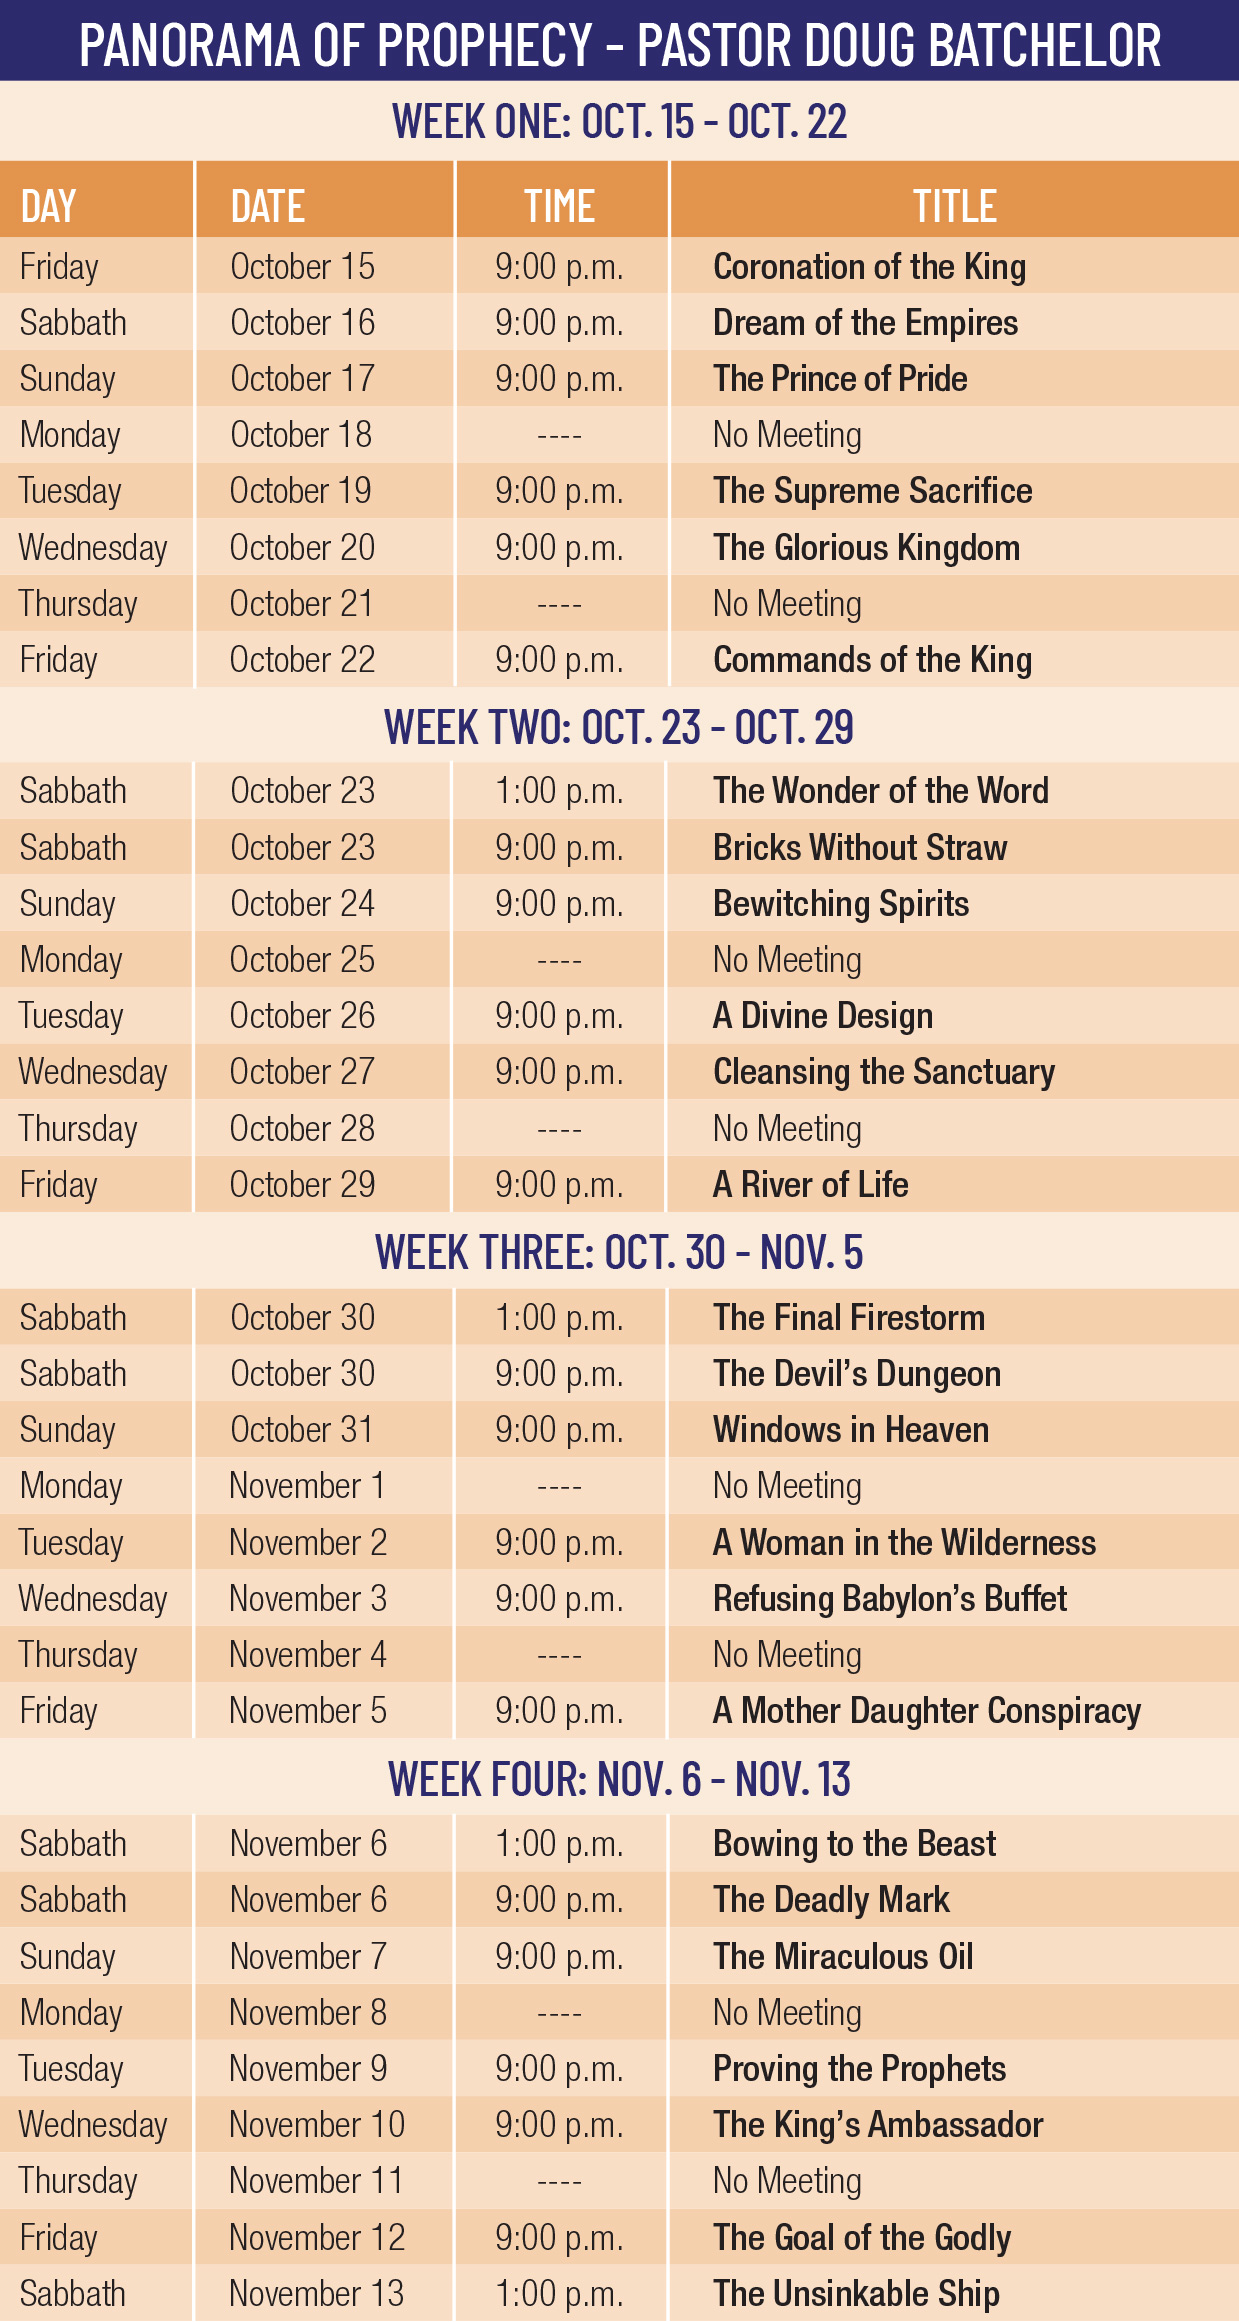 Panorama-of-Prophecy-Schedule